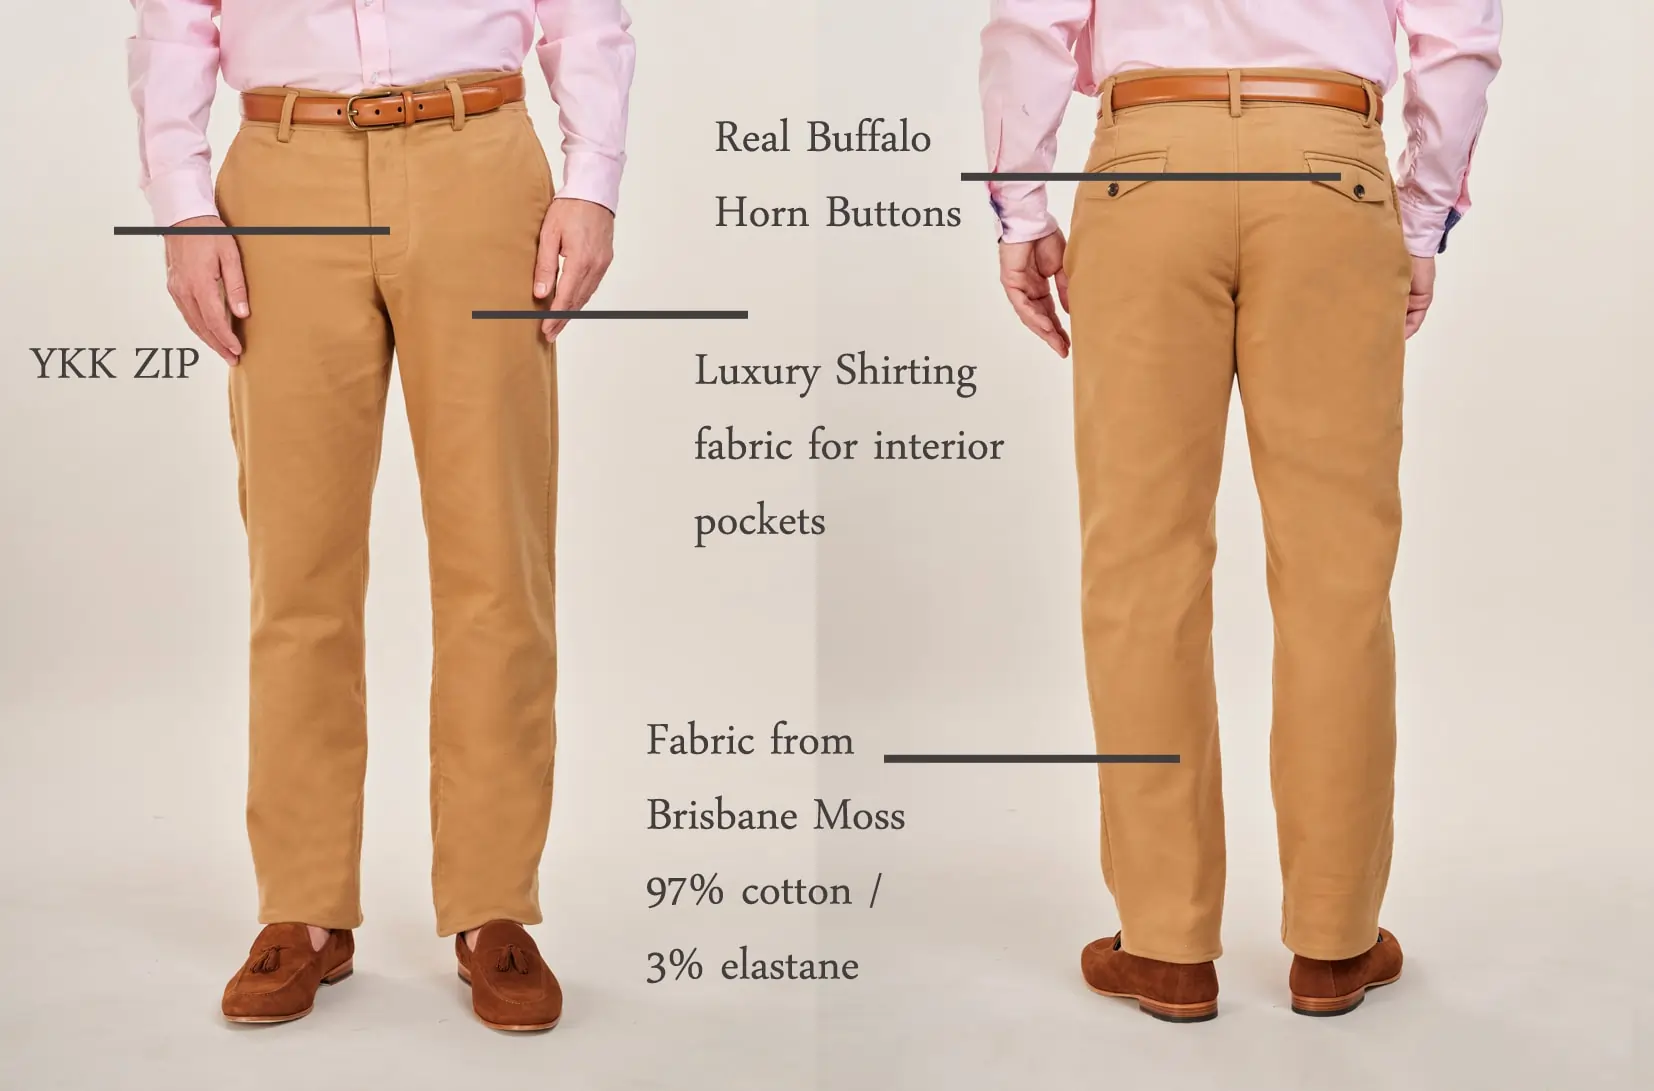 moleskin trouser features including YKK zip, real buffalo horn buttons and luxury
shirting fabric for interior pockets